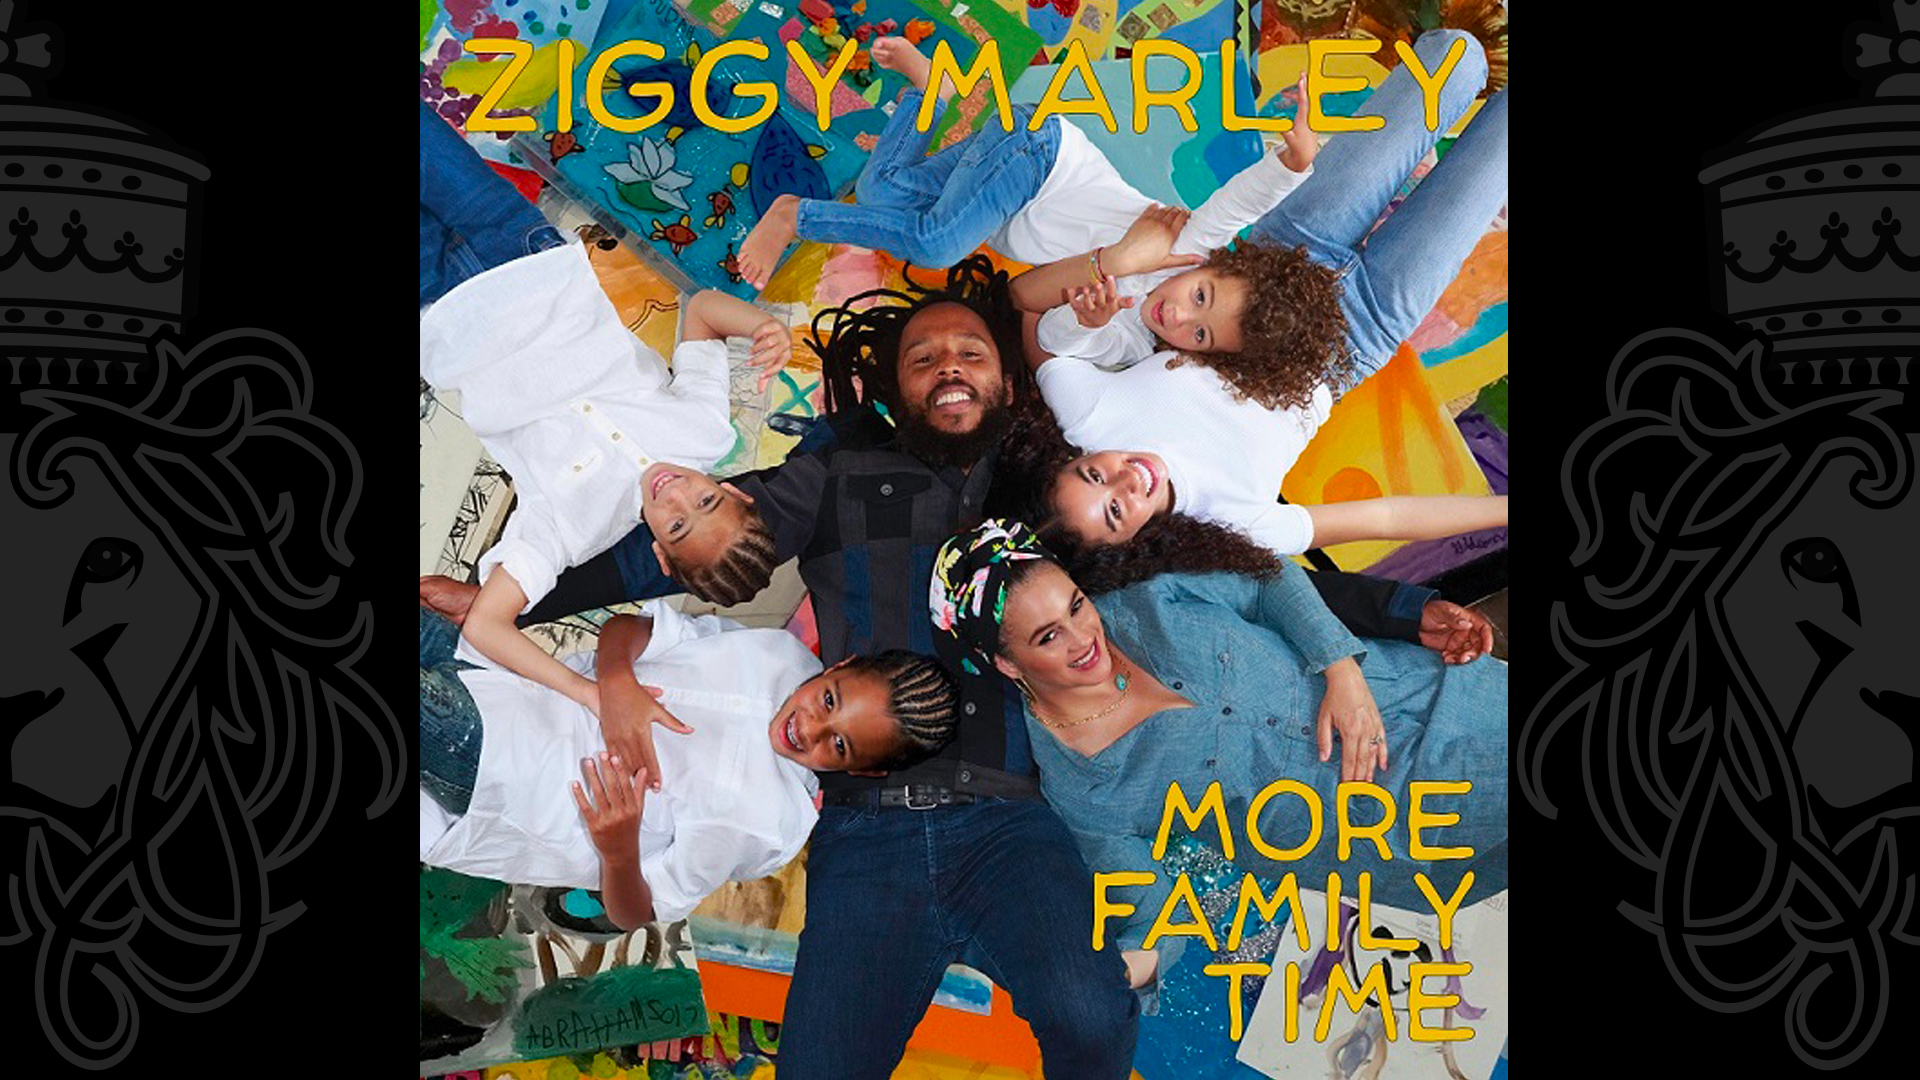 Ziggy Marley releases his new Family album "More Family Time"